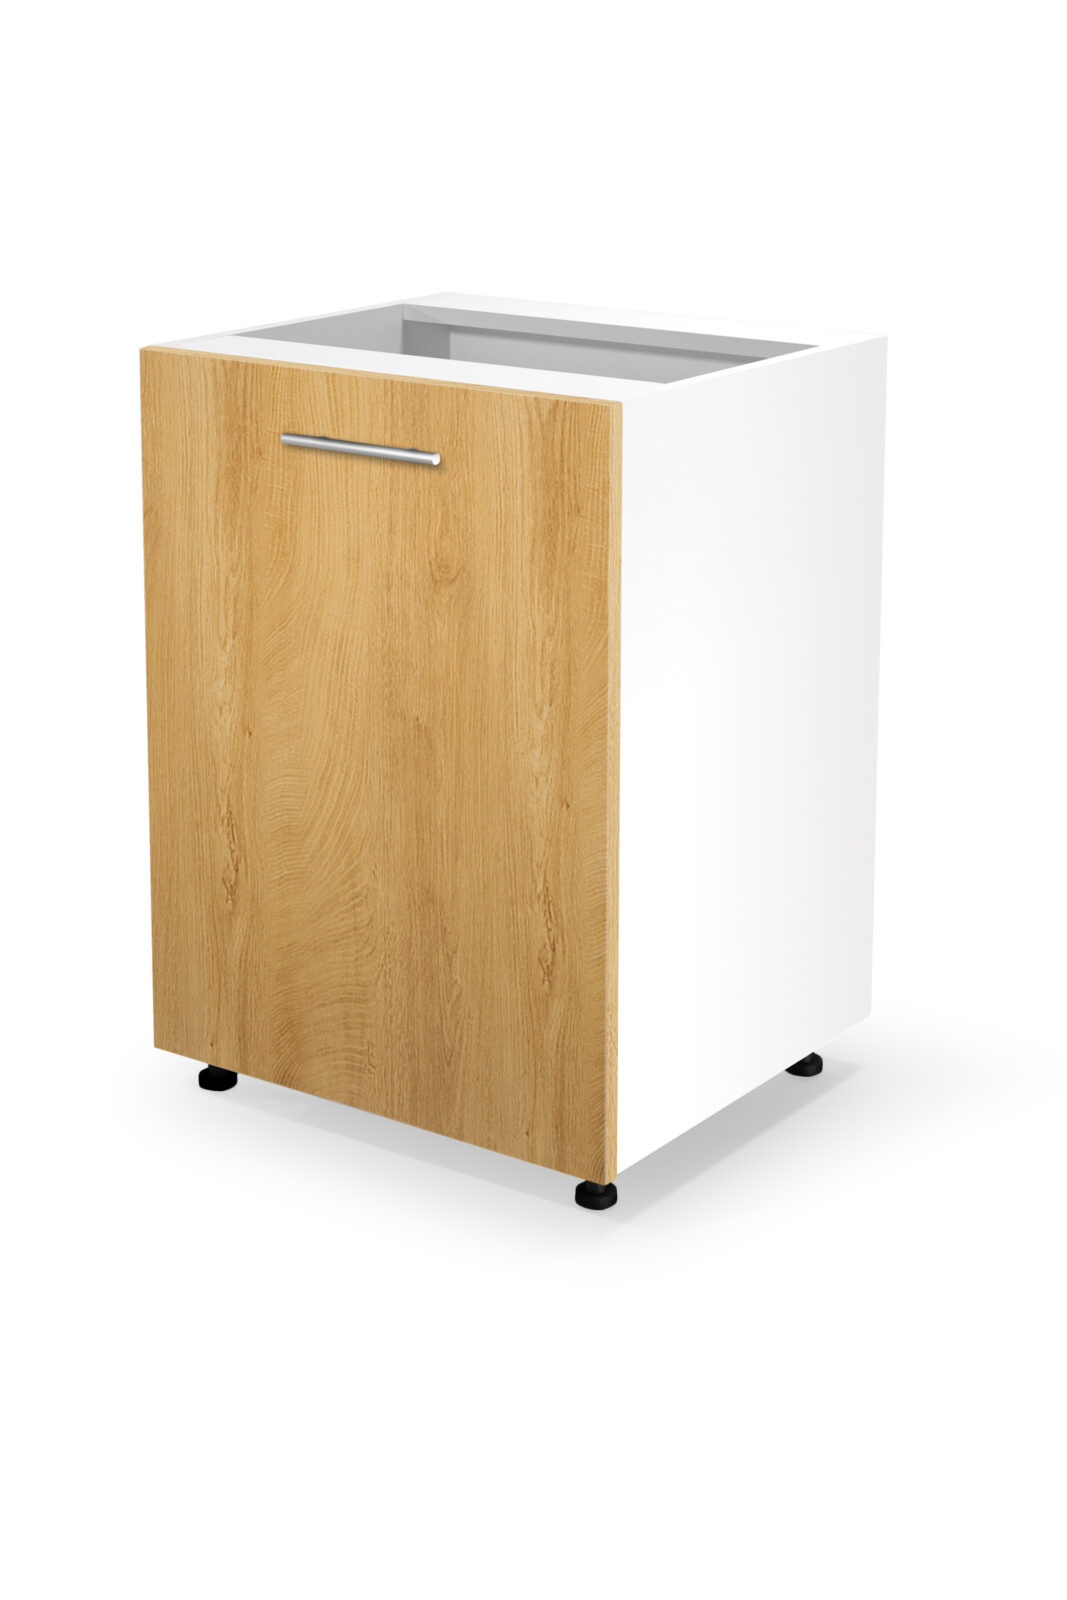 VENTO D-60/82 lower cabinet